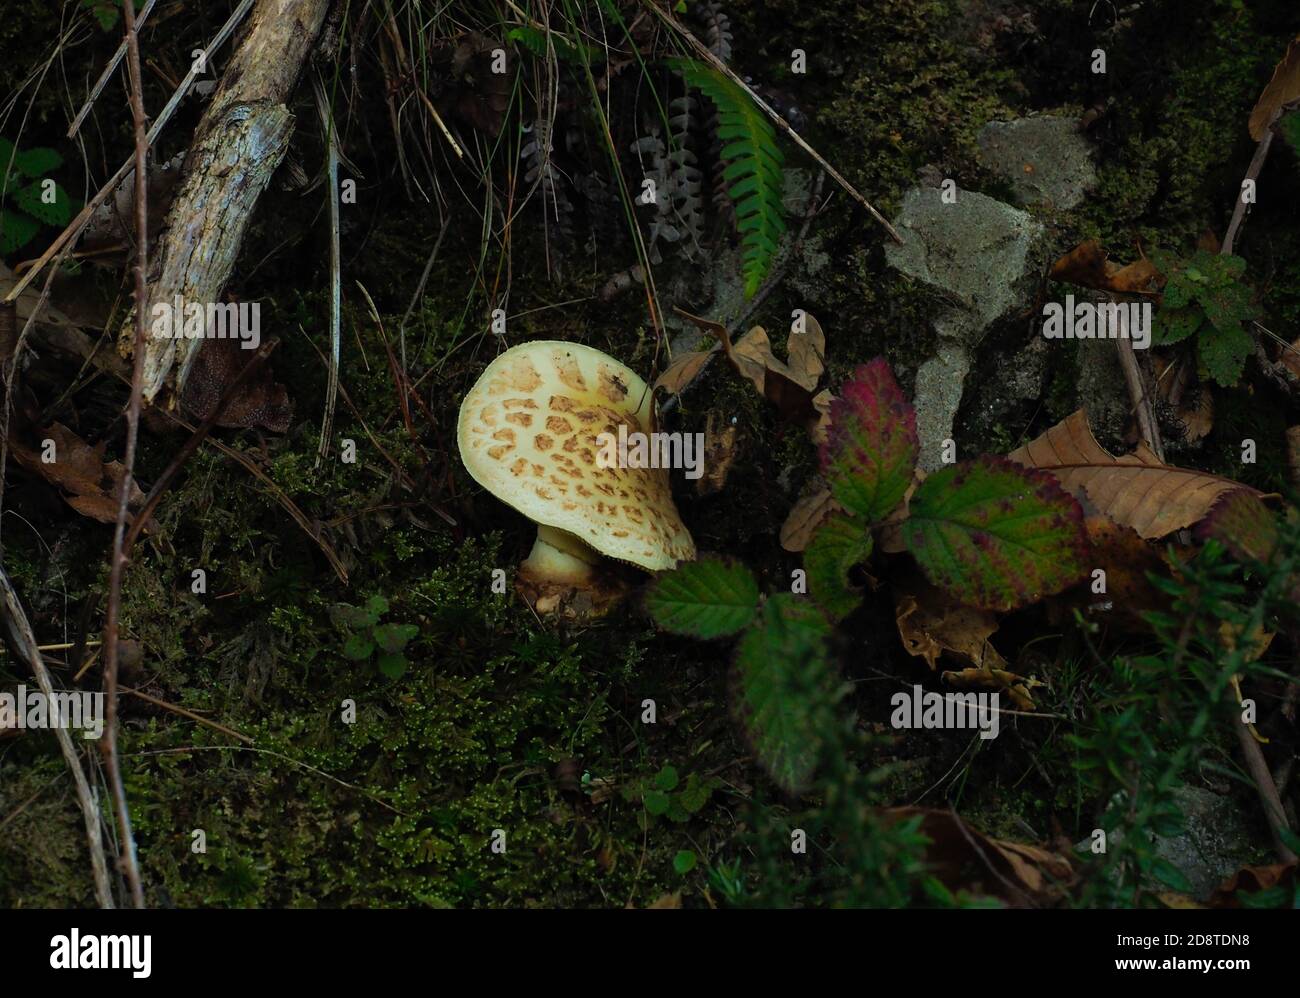 wild mushroom in the forest Stock Photo